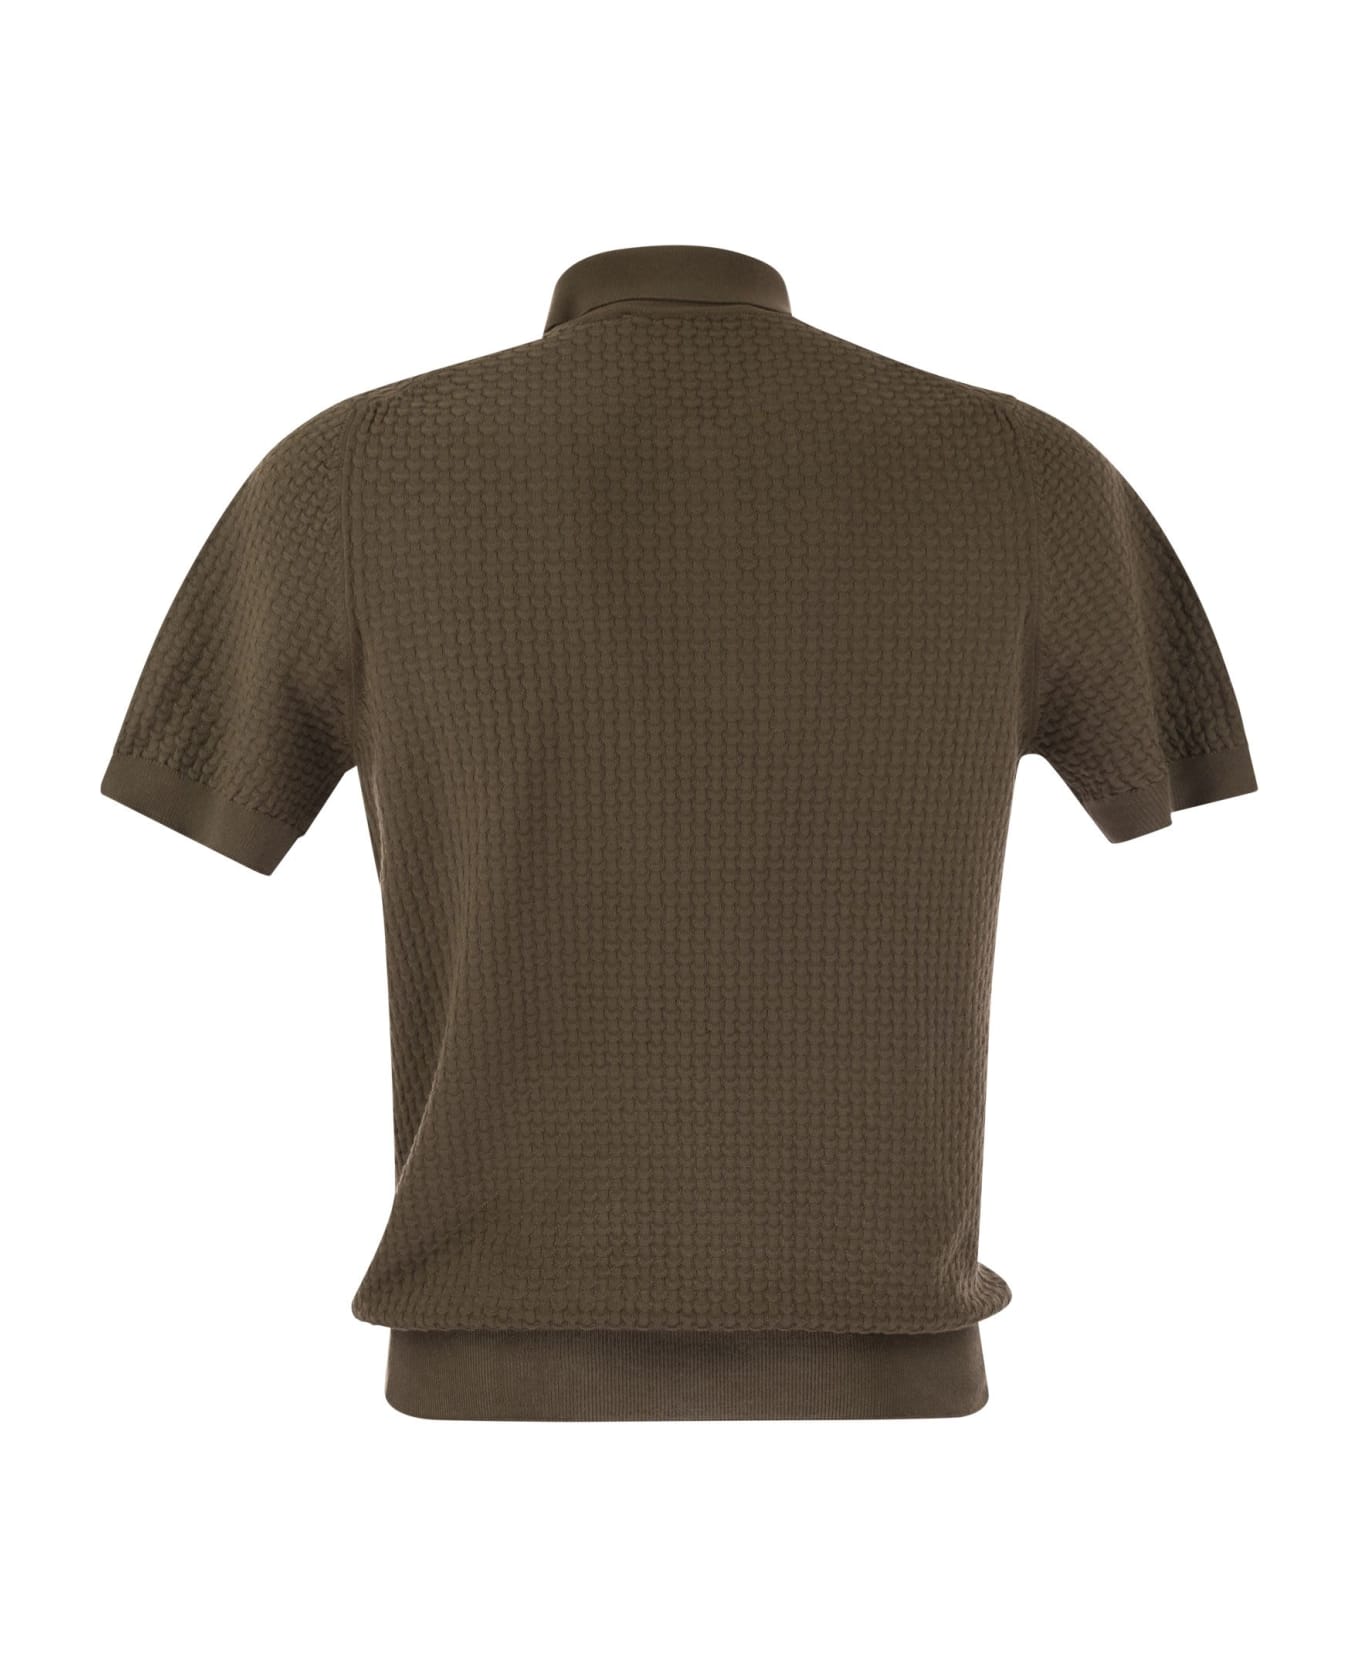 Tagliatore Knitted Cotton Polo Shirt - Brown